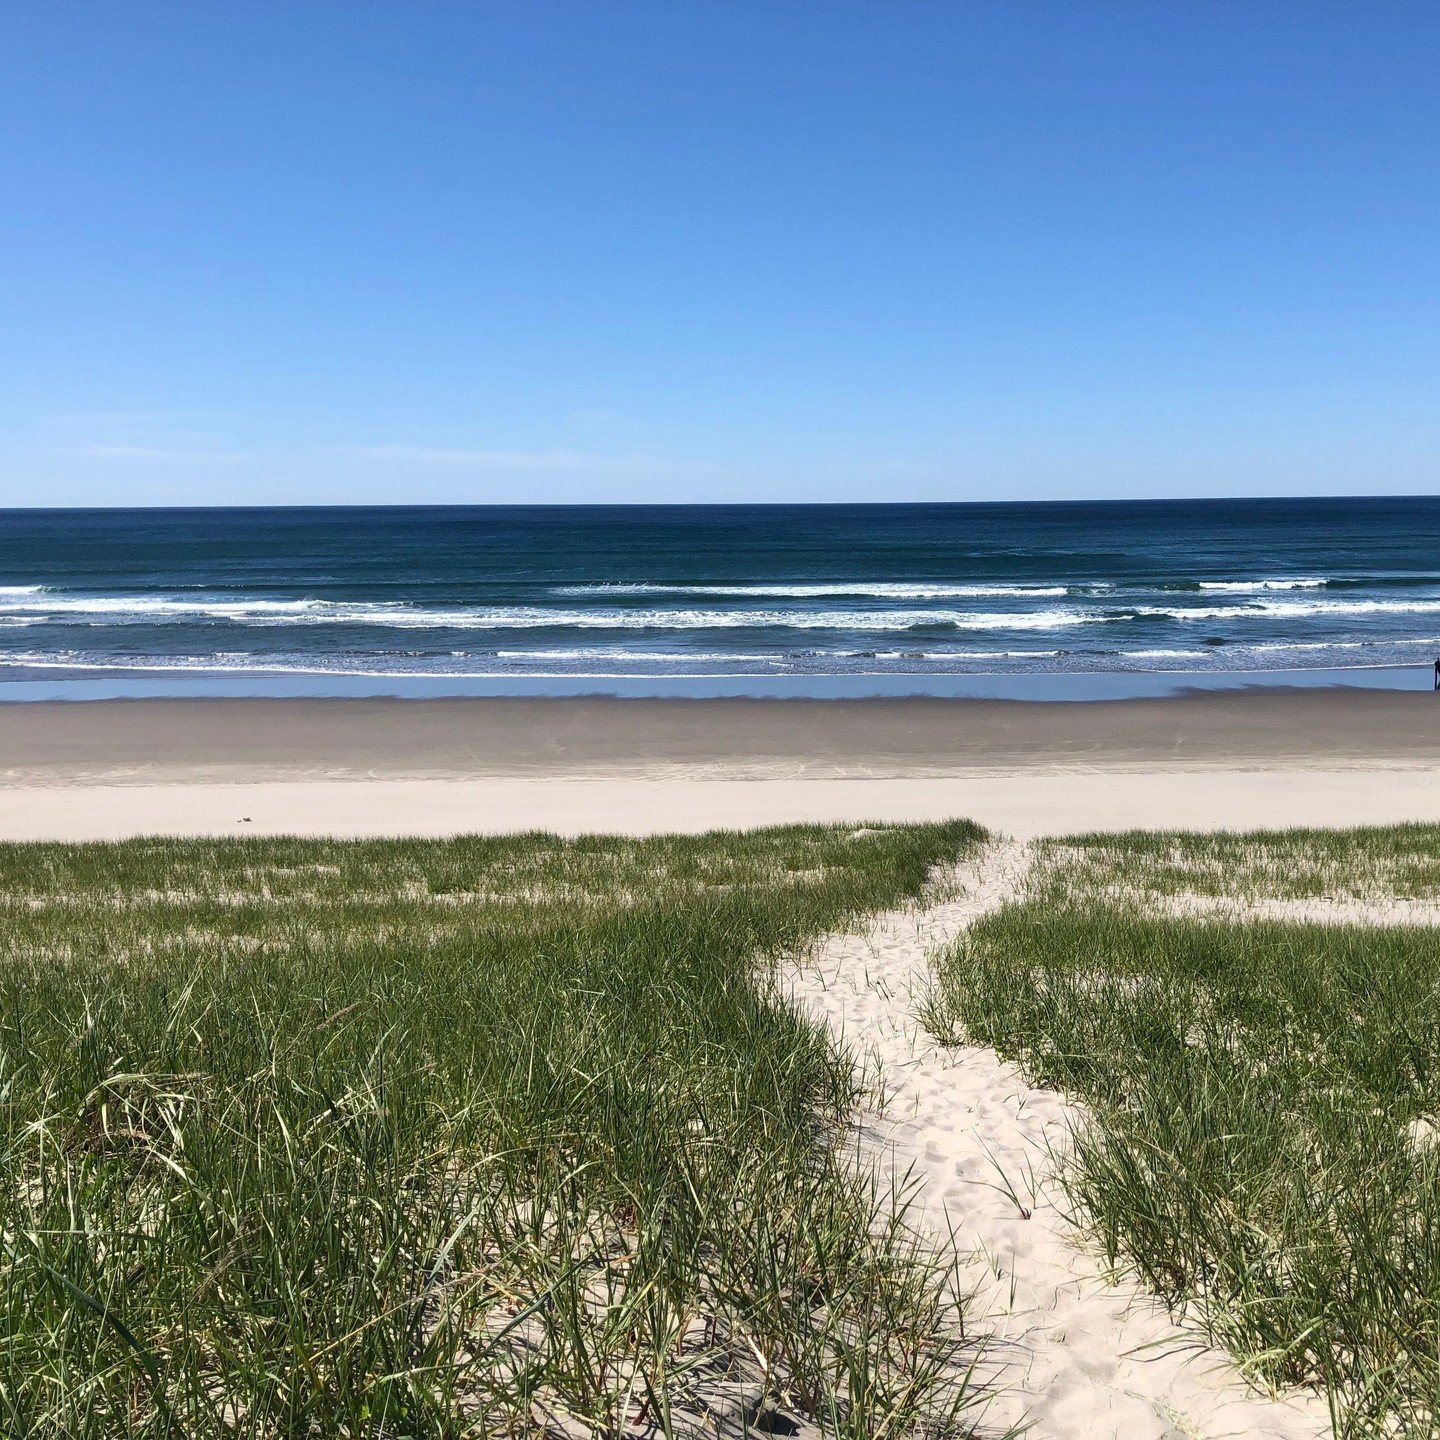 &quot;Wow, this view from our client's beach house is something special! The sun is shining, progress being made&mdash;a good day.&quot; ❤️ Oregon Coast ⁠